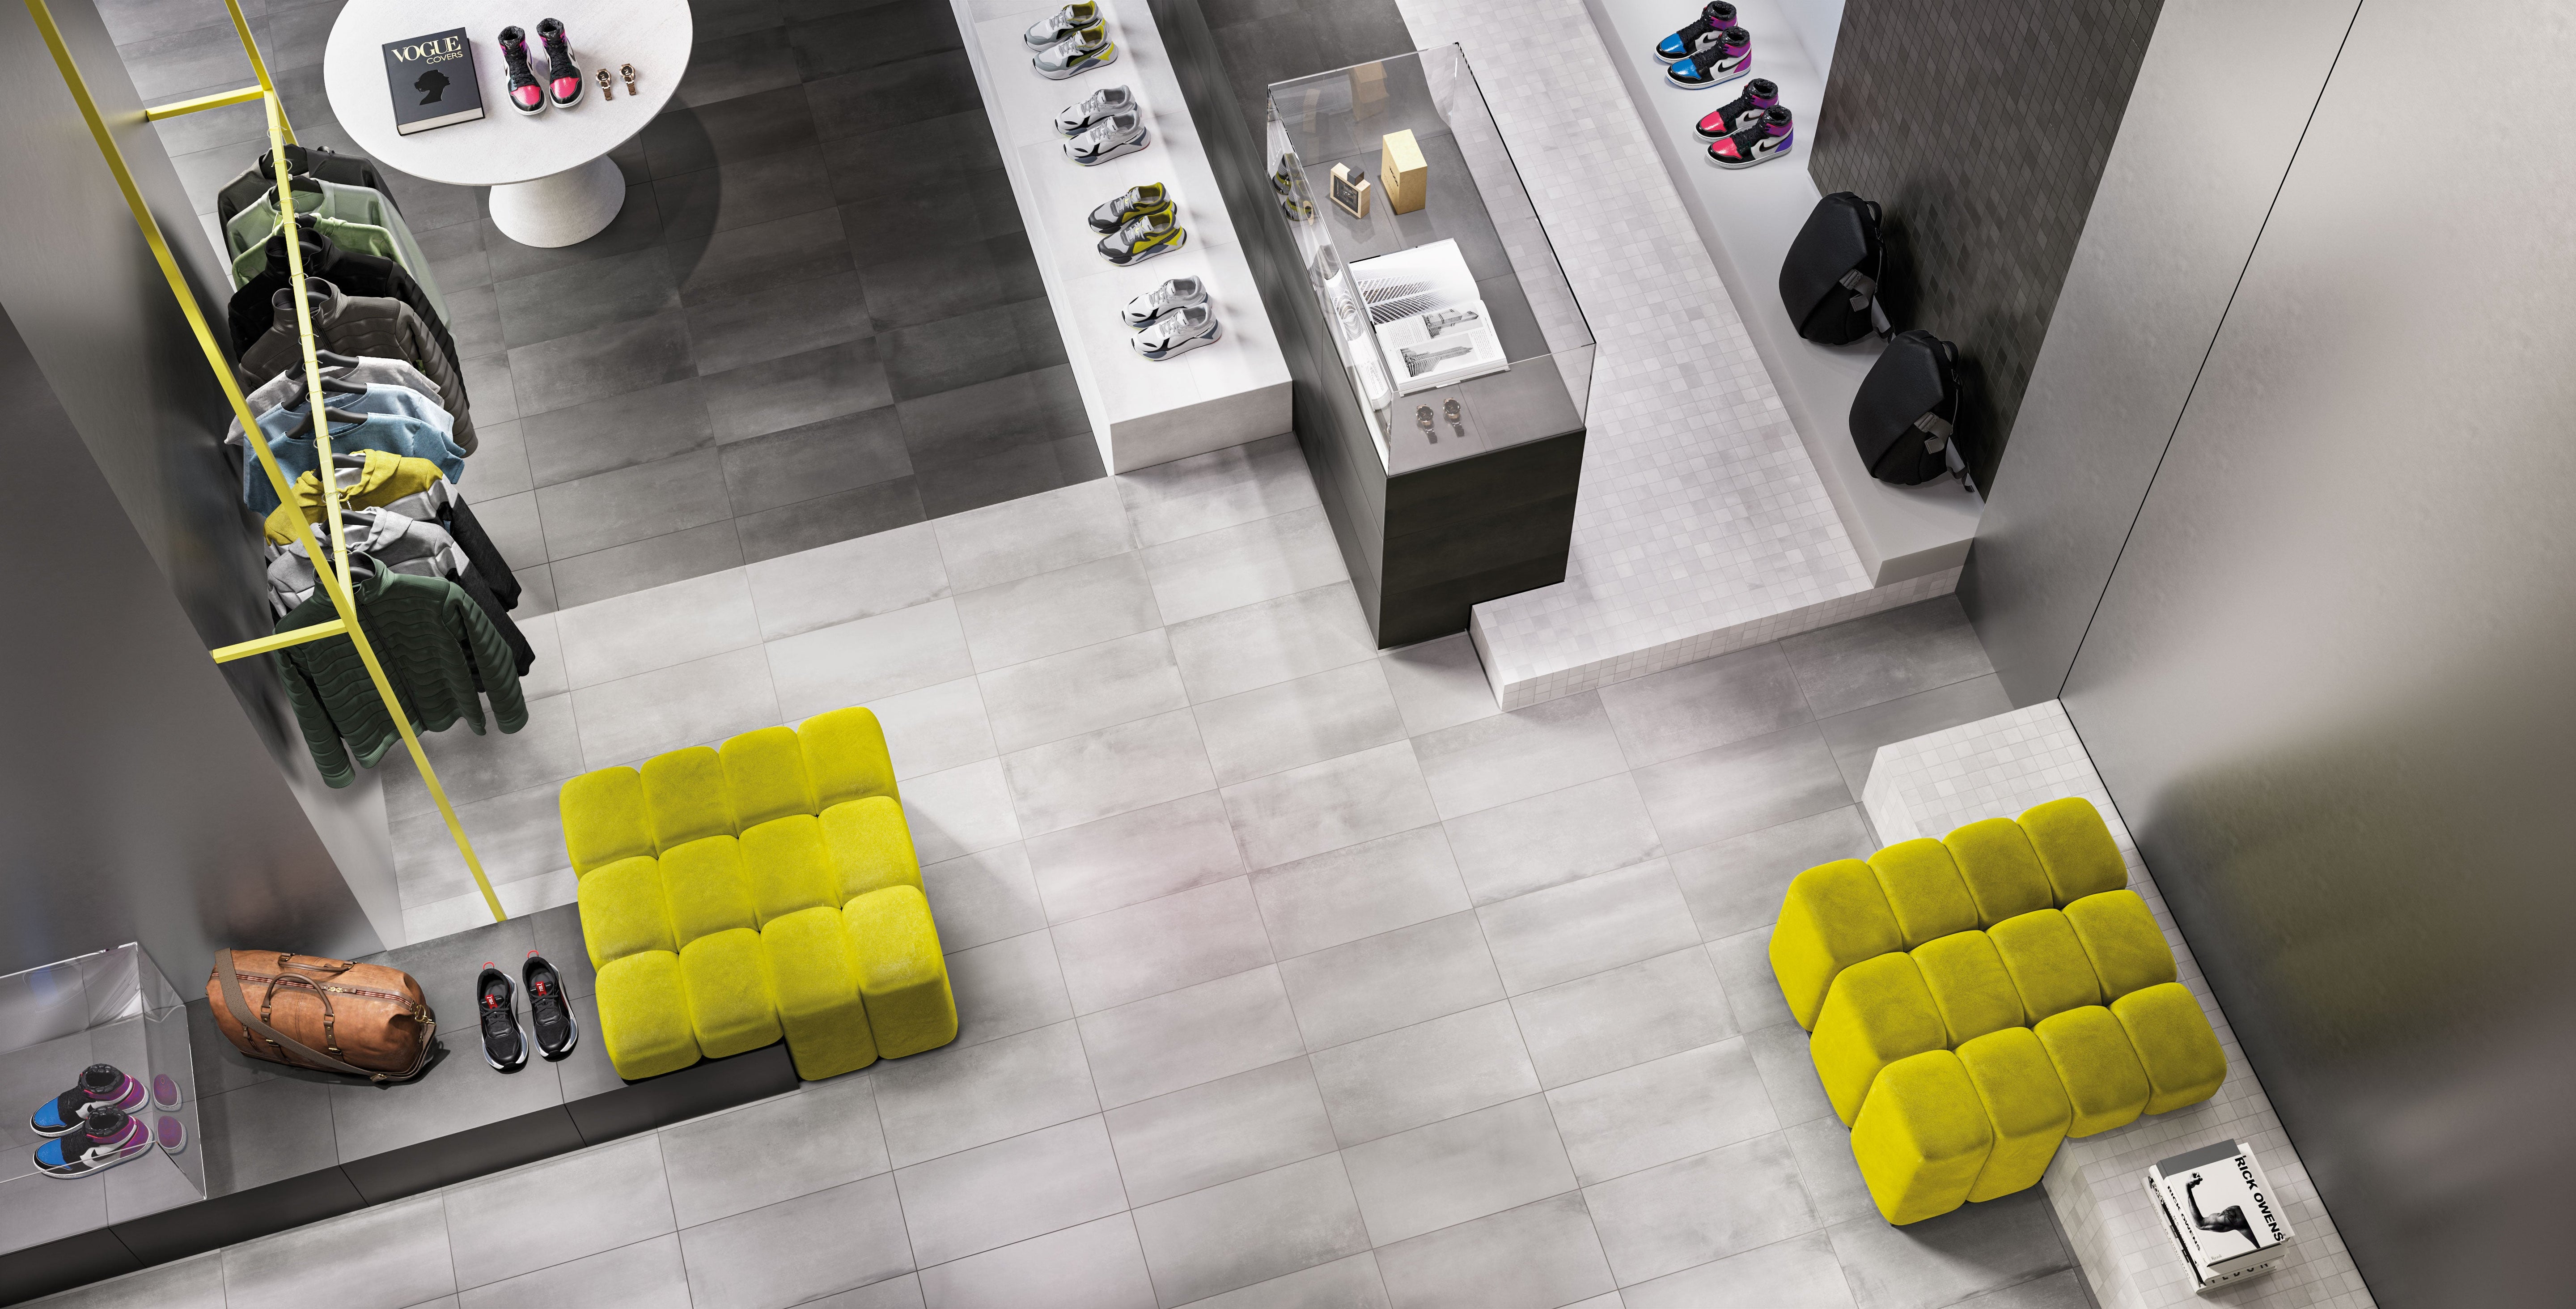 Porcelain tile flooring from Surface Group's Chicago Collection in a modern retail interior setting with neutral tones and vibrant furniture accents.